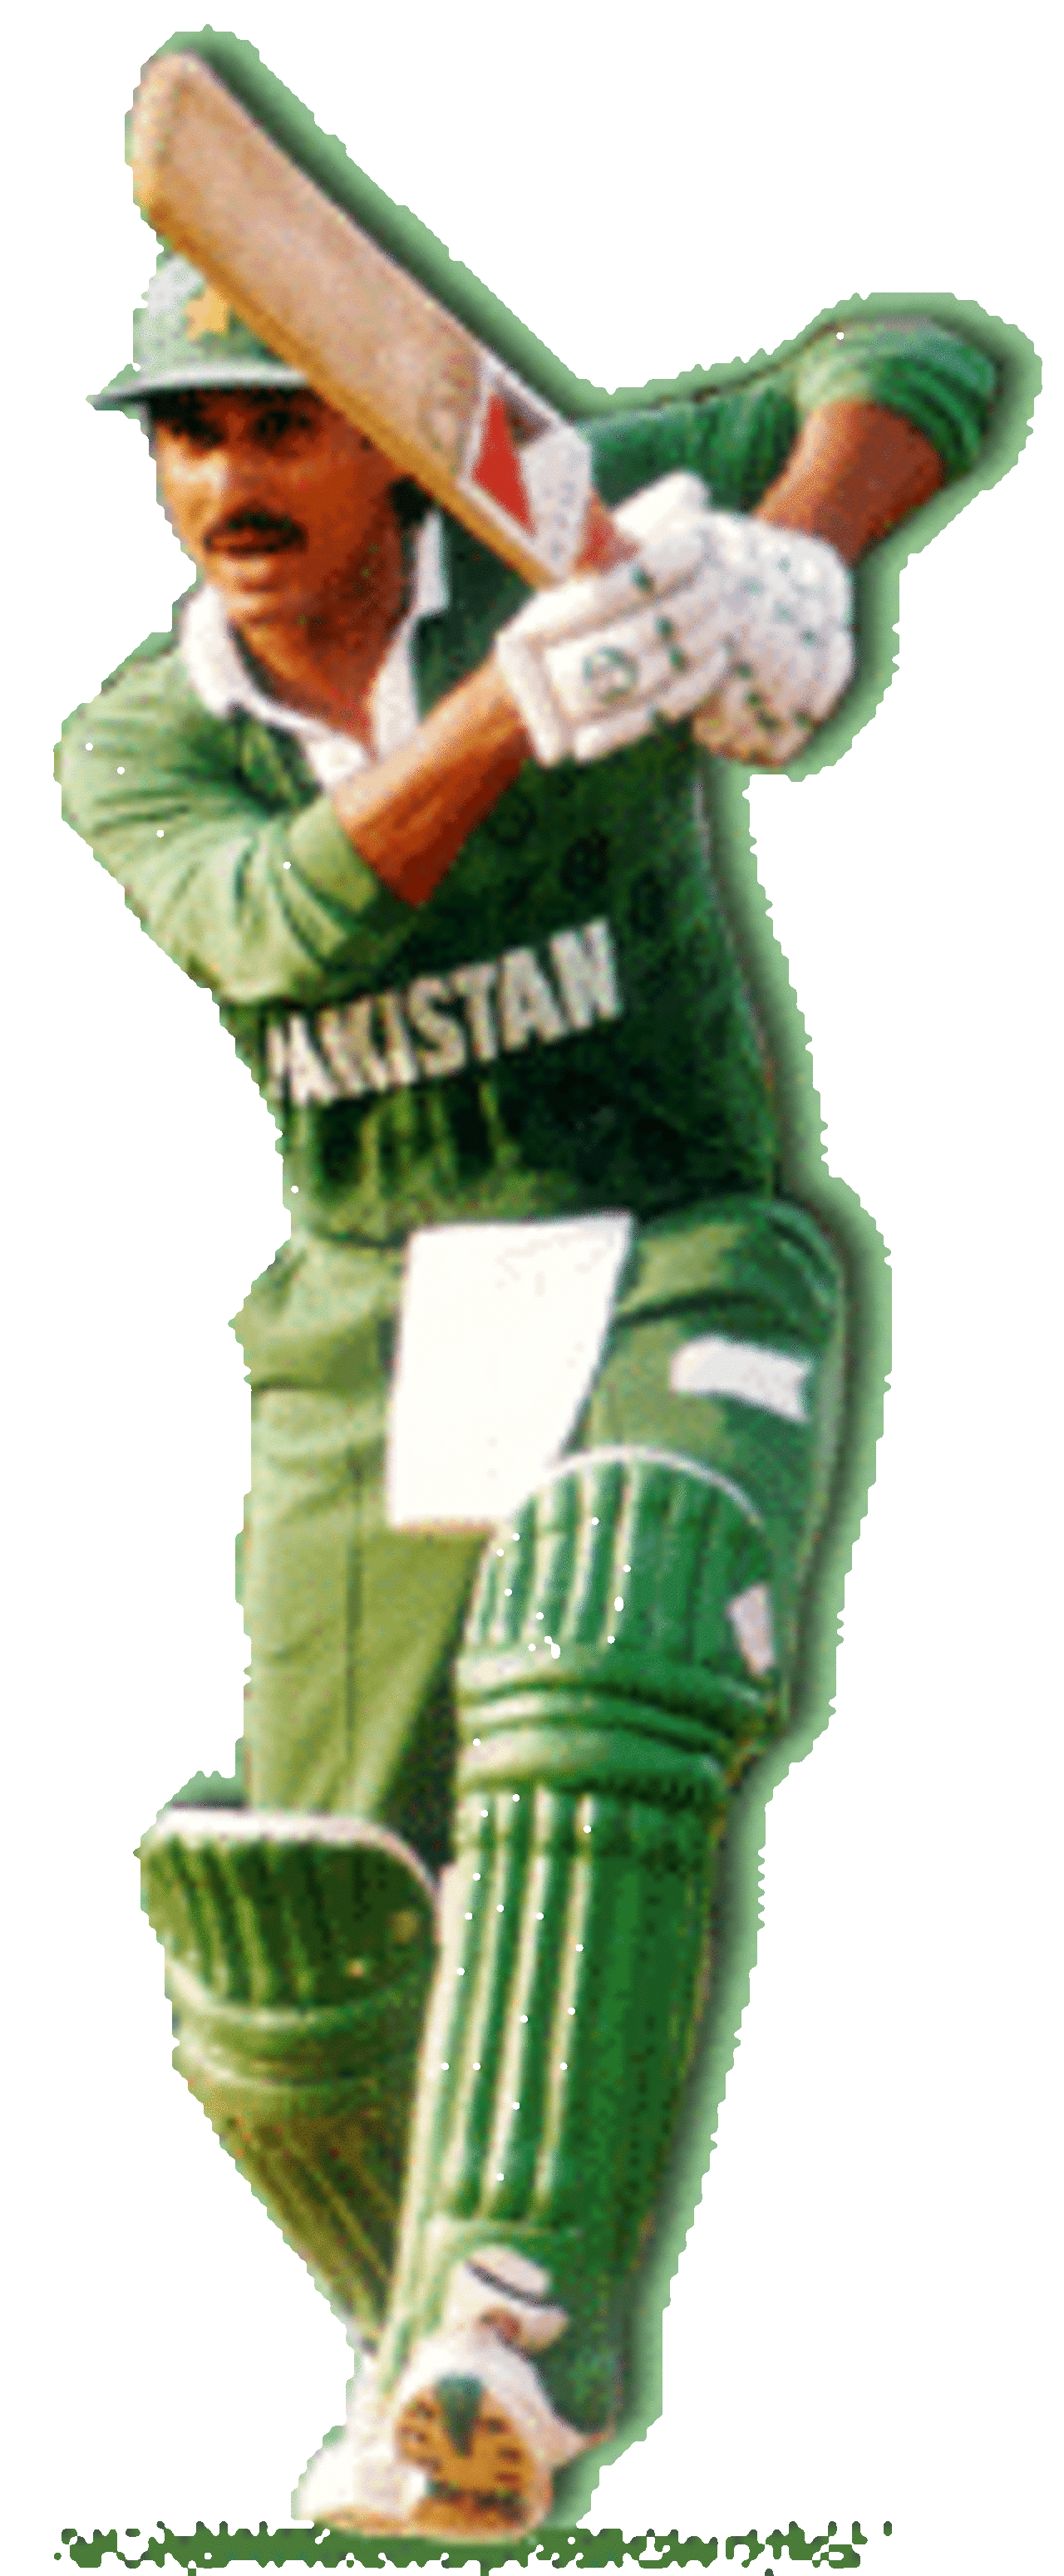 Rameez Raja drives the ball while playing for Pakistan